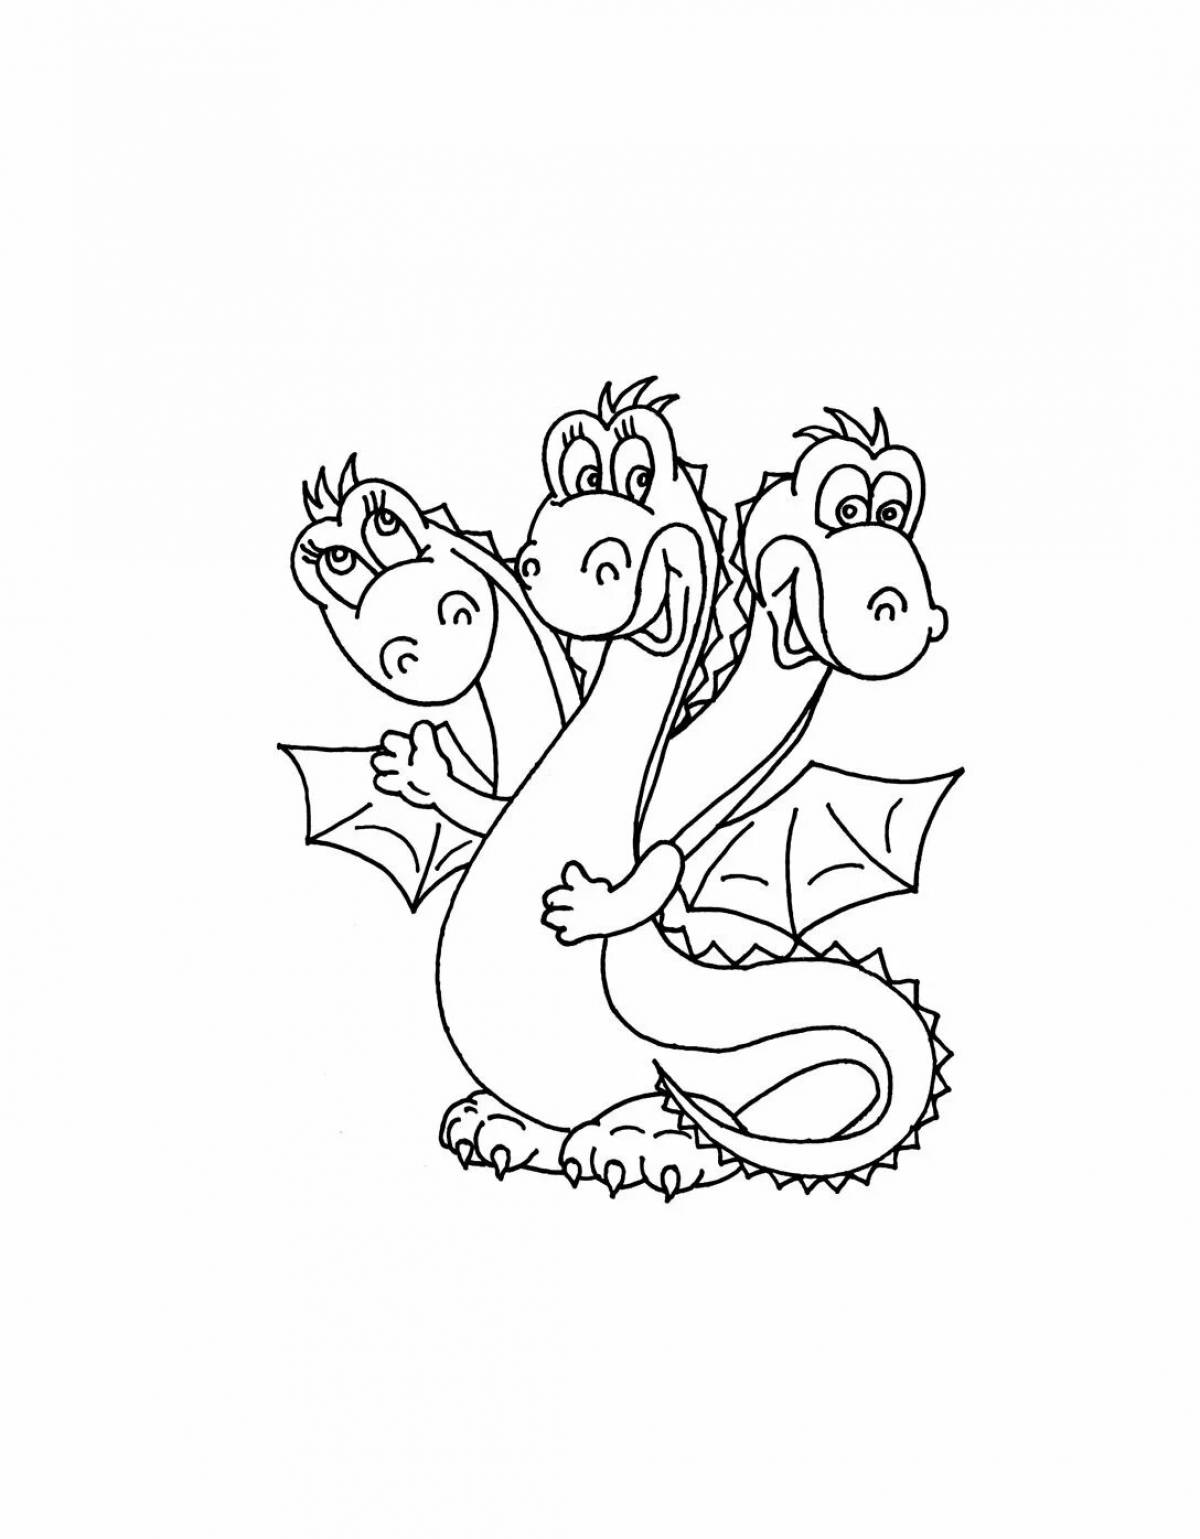 Mythical dragon coloring book